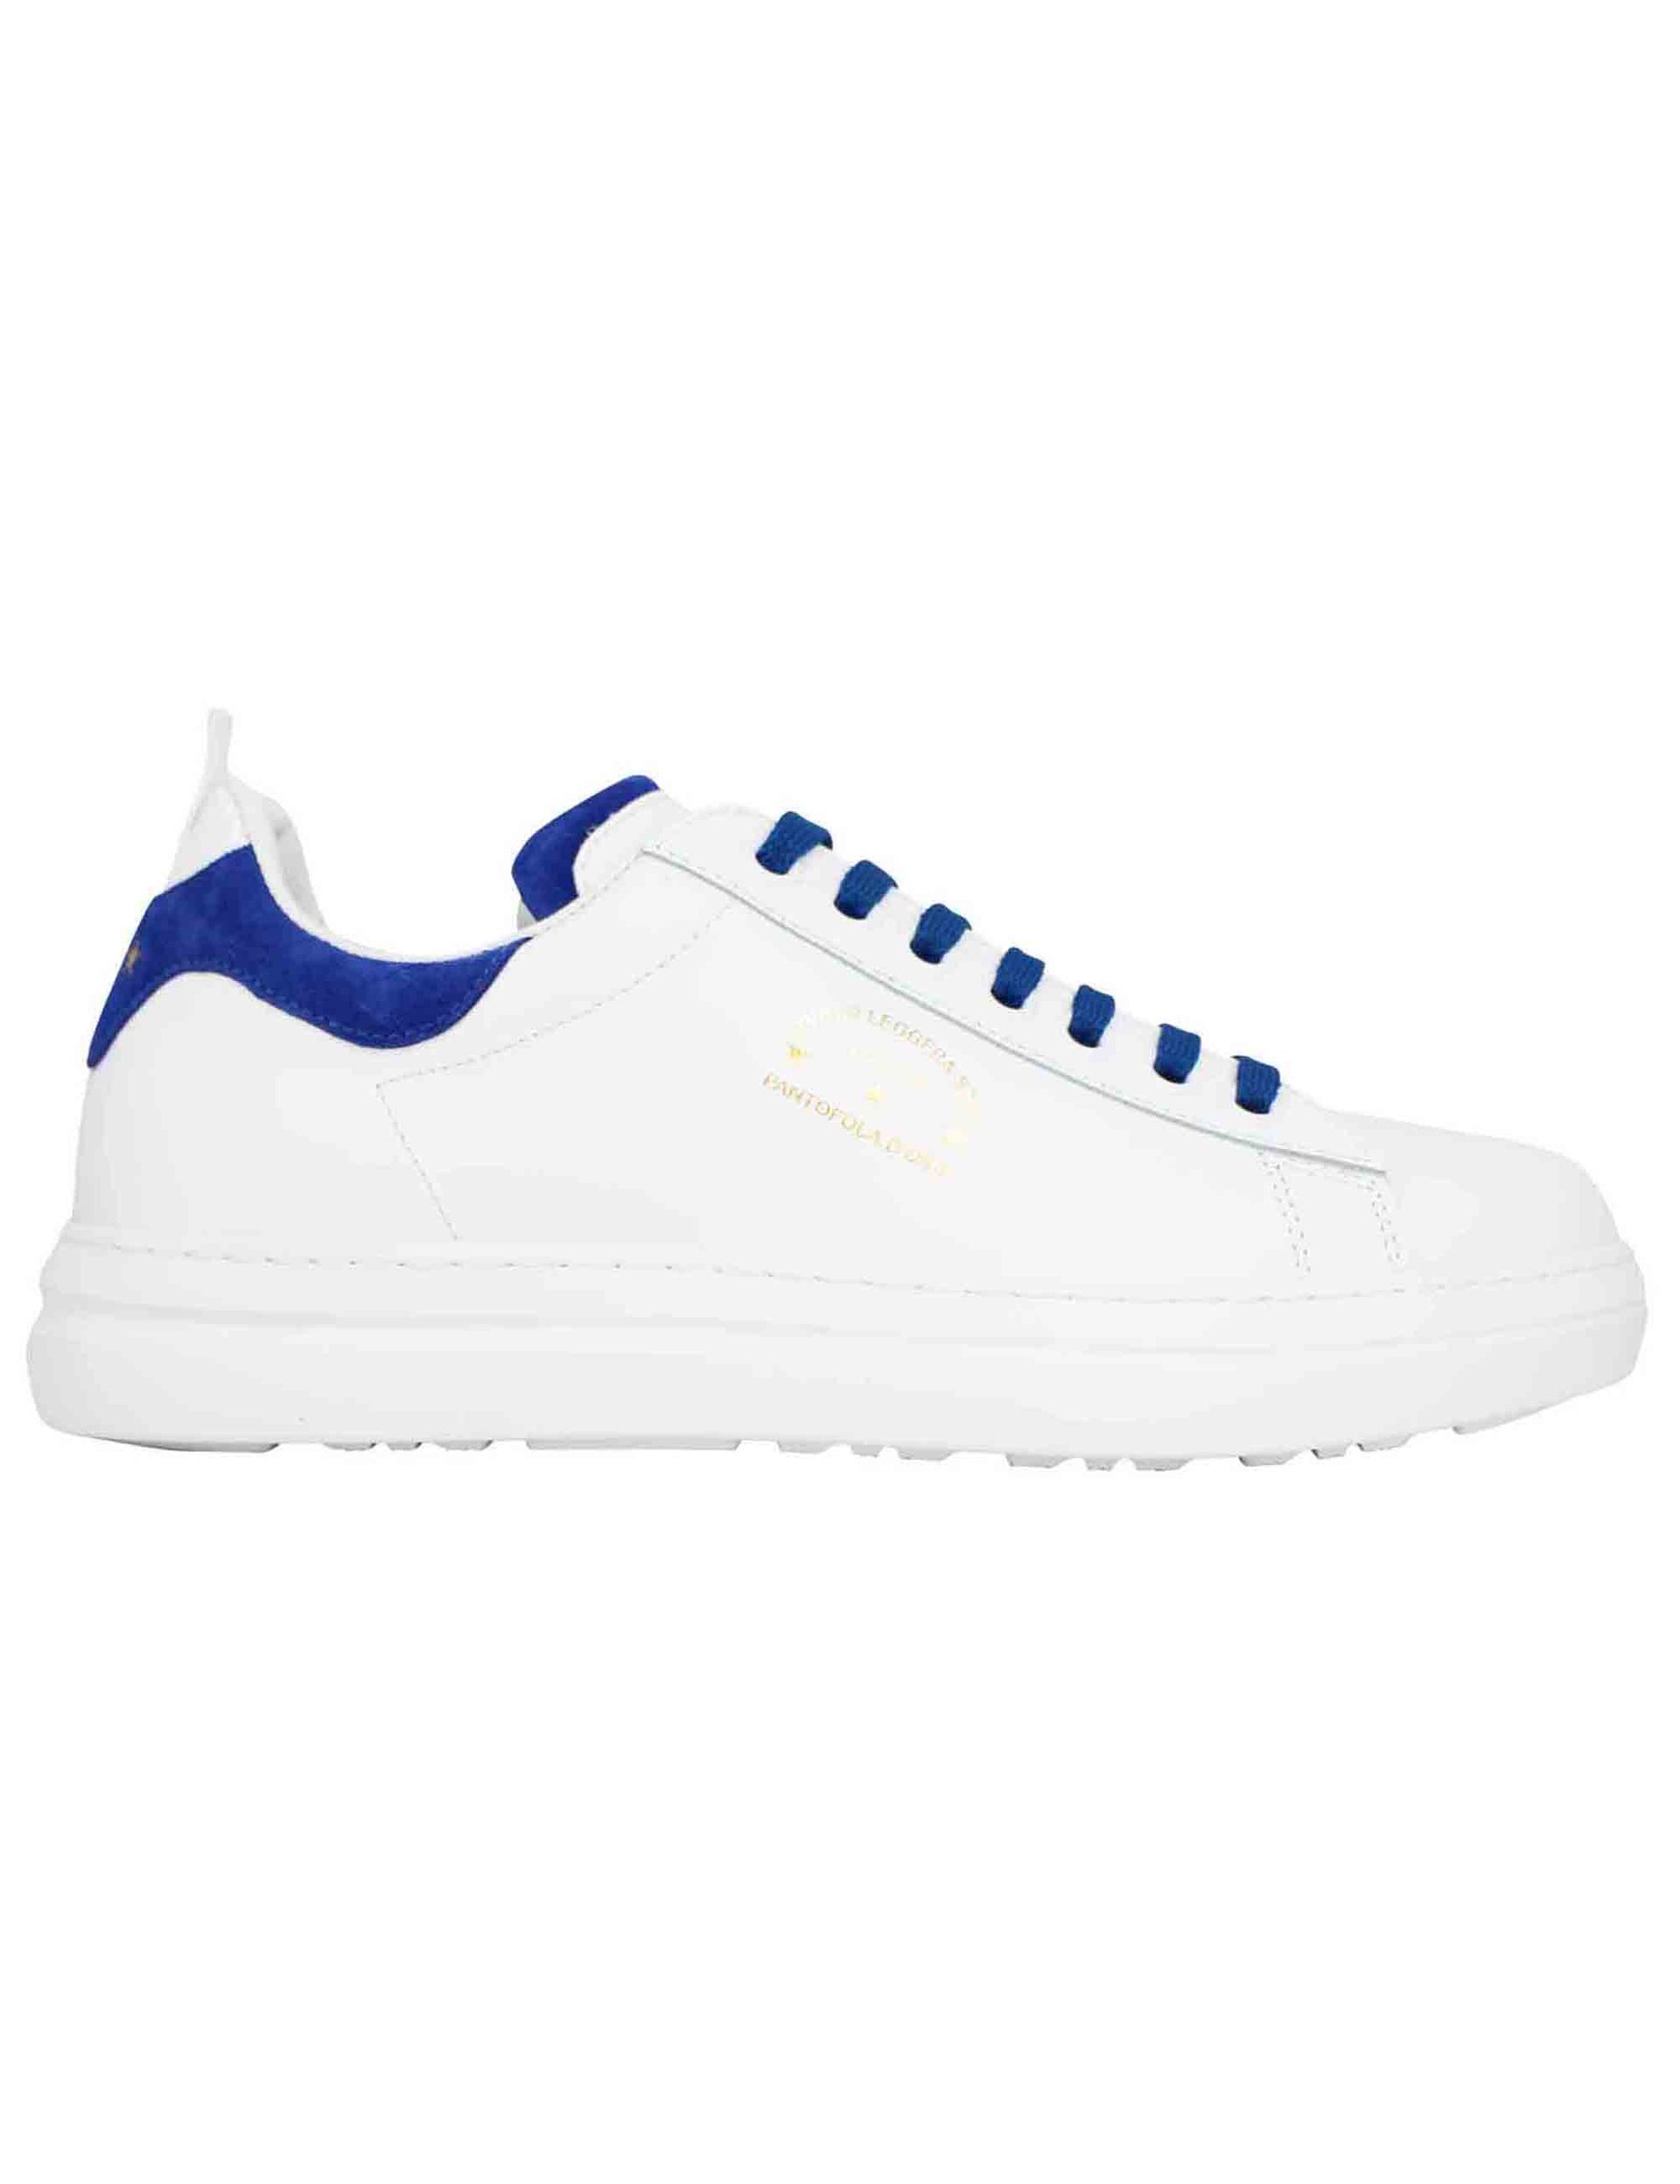 Court classic men's sneakers in white leather